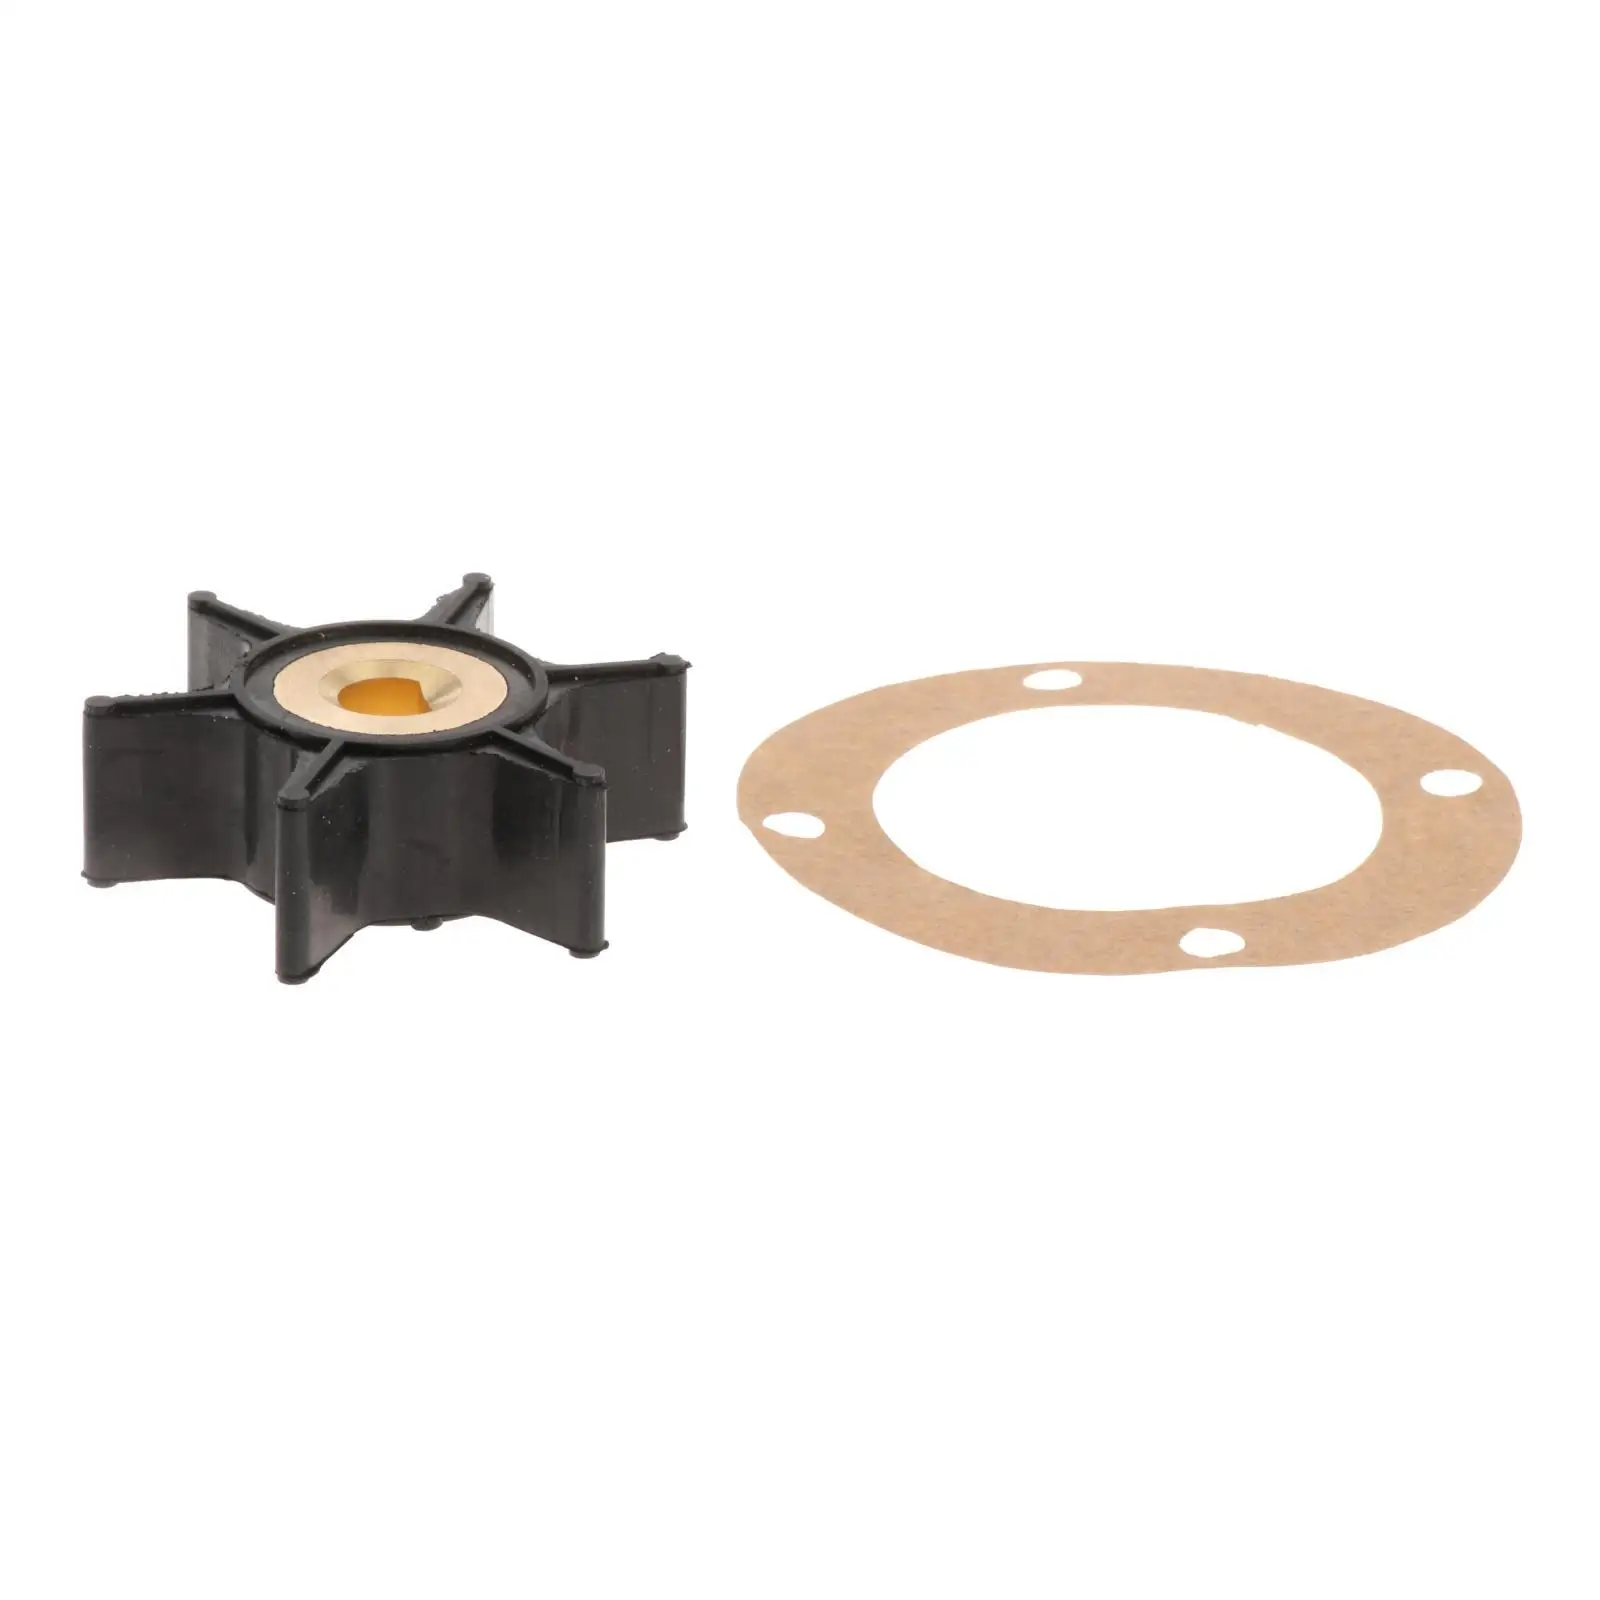 2 Pieces Impeller and 4-Hole Gasket Kit Plastic Replacement Fits for Onan 131-0386 170-3172 131-0257 Water Pump Mcck 4.0 kW